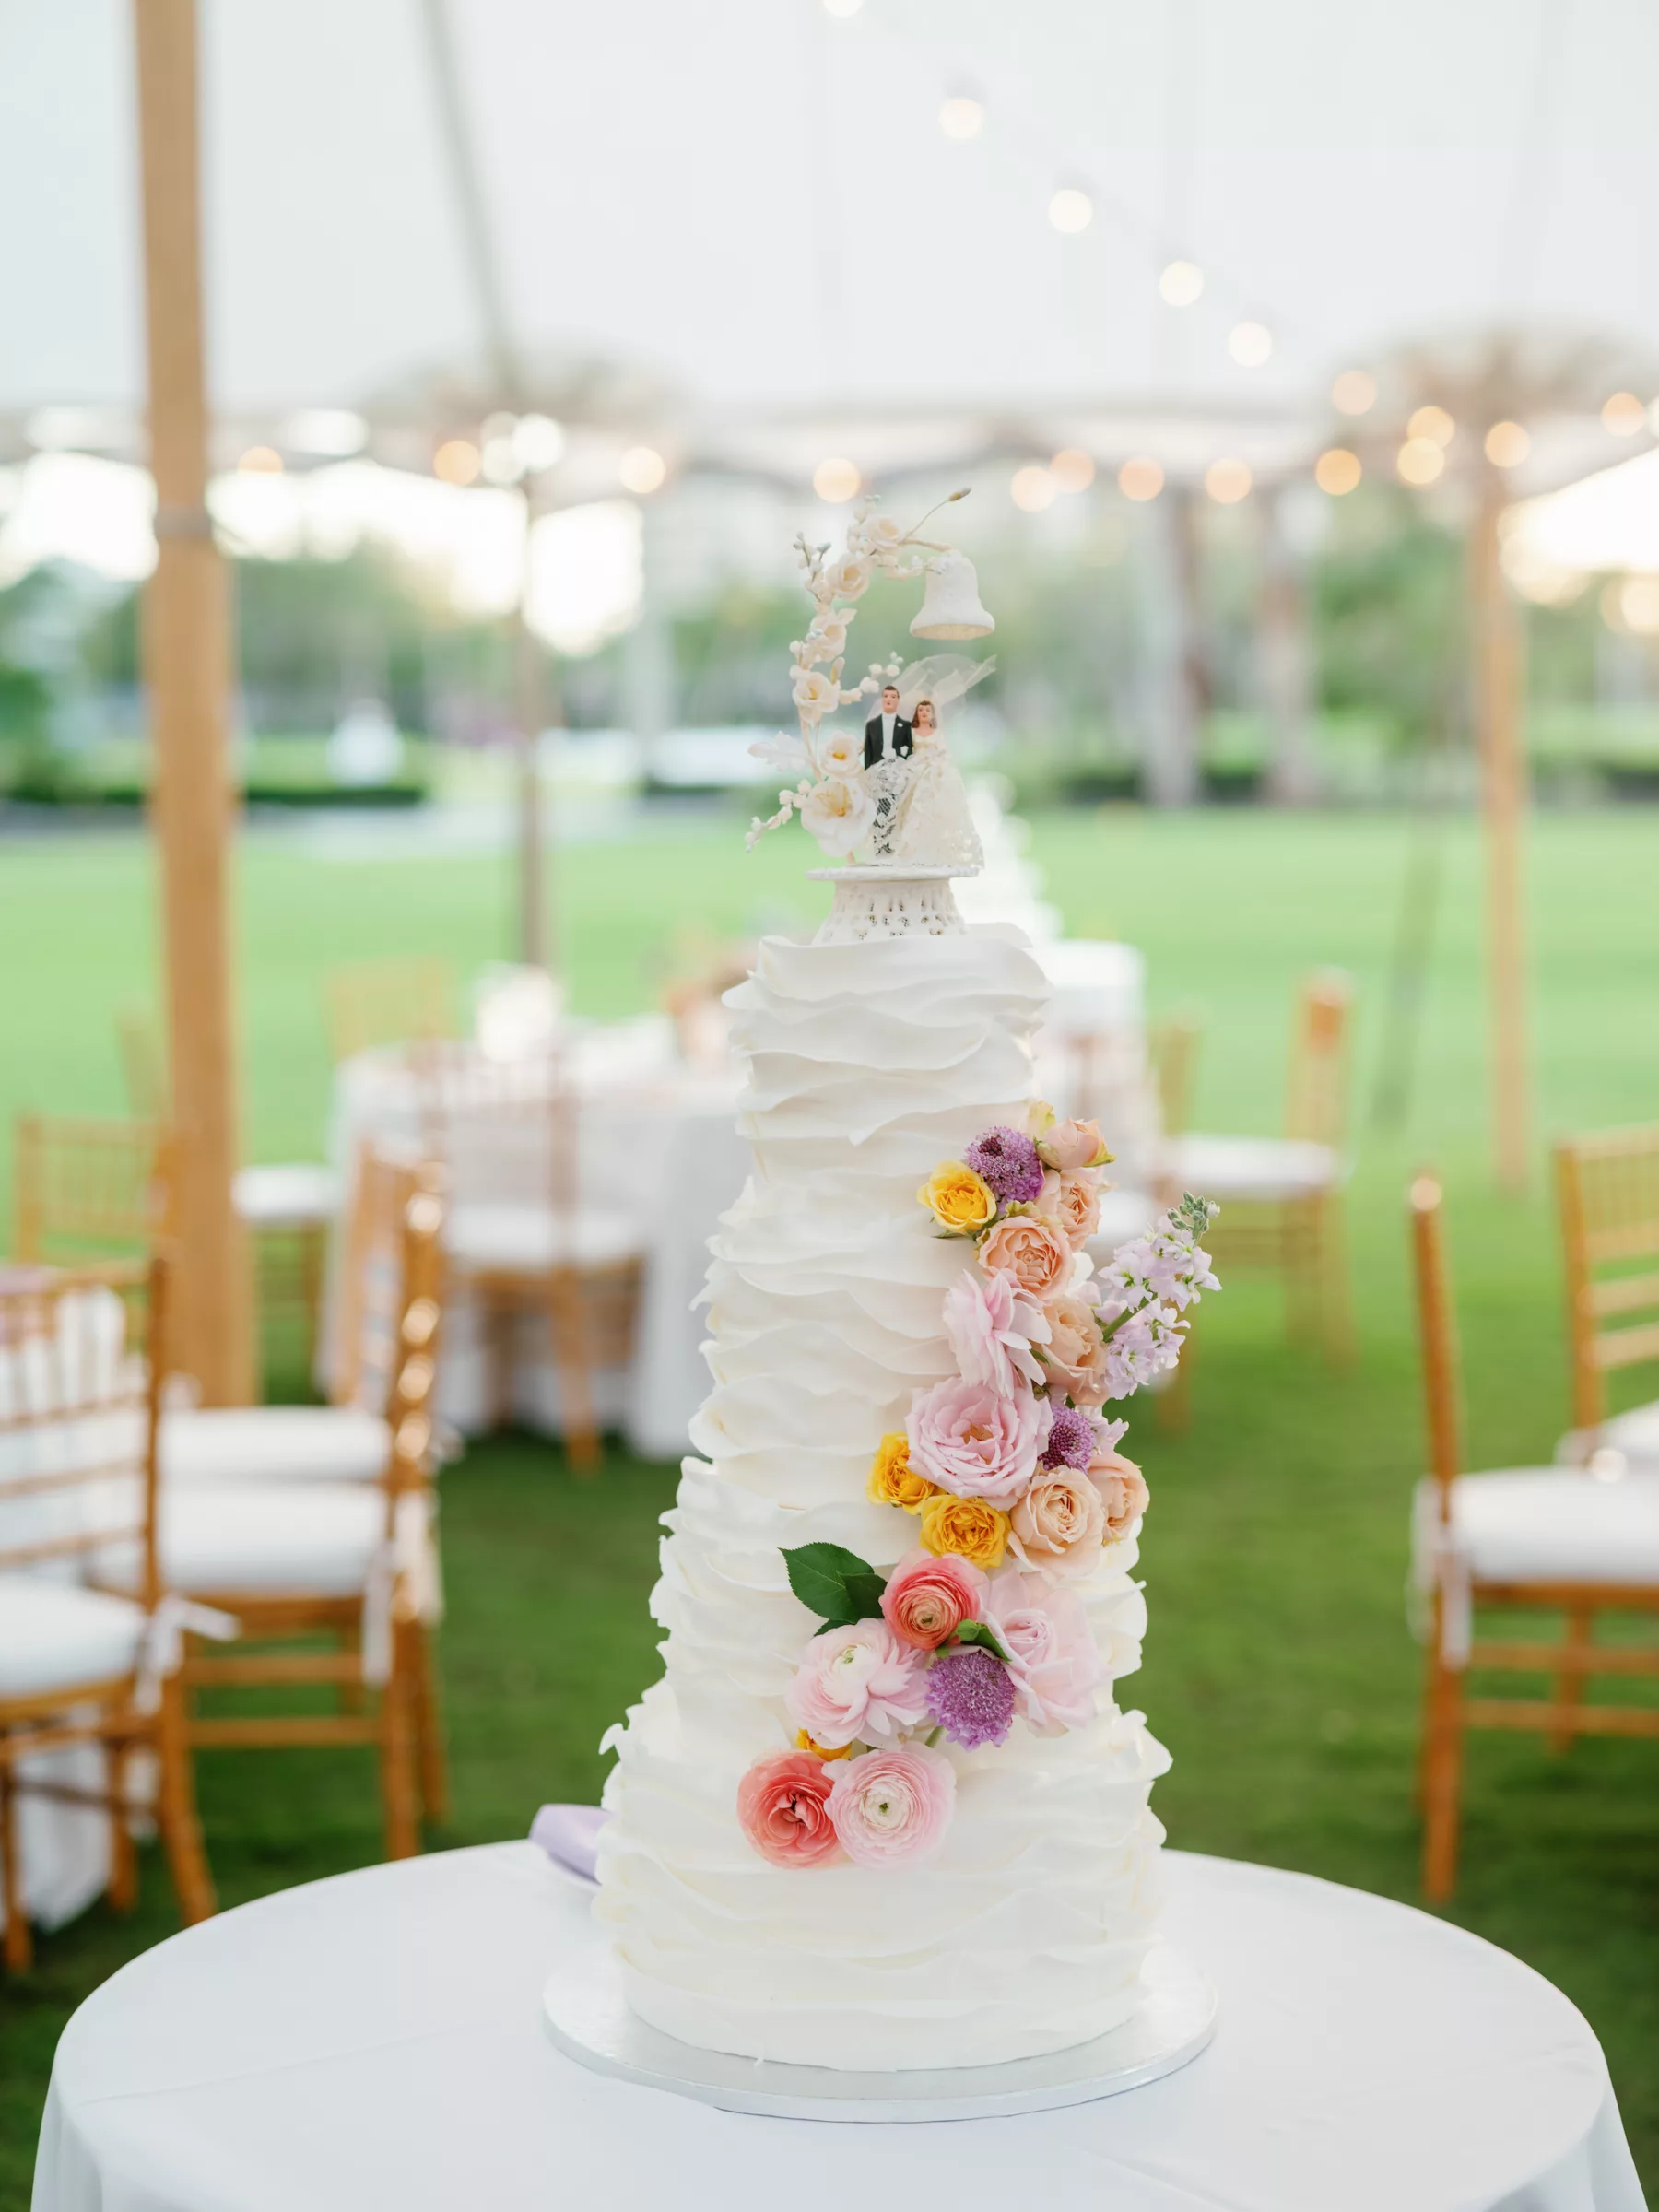 Whimsical Round White Textured Four-Tiered Wedding Cake with Pastel Rose Accents